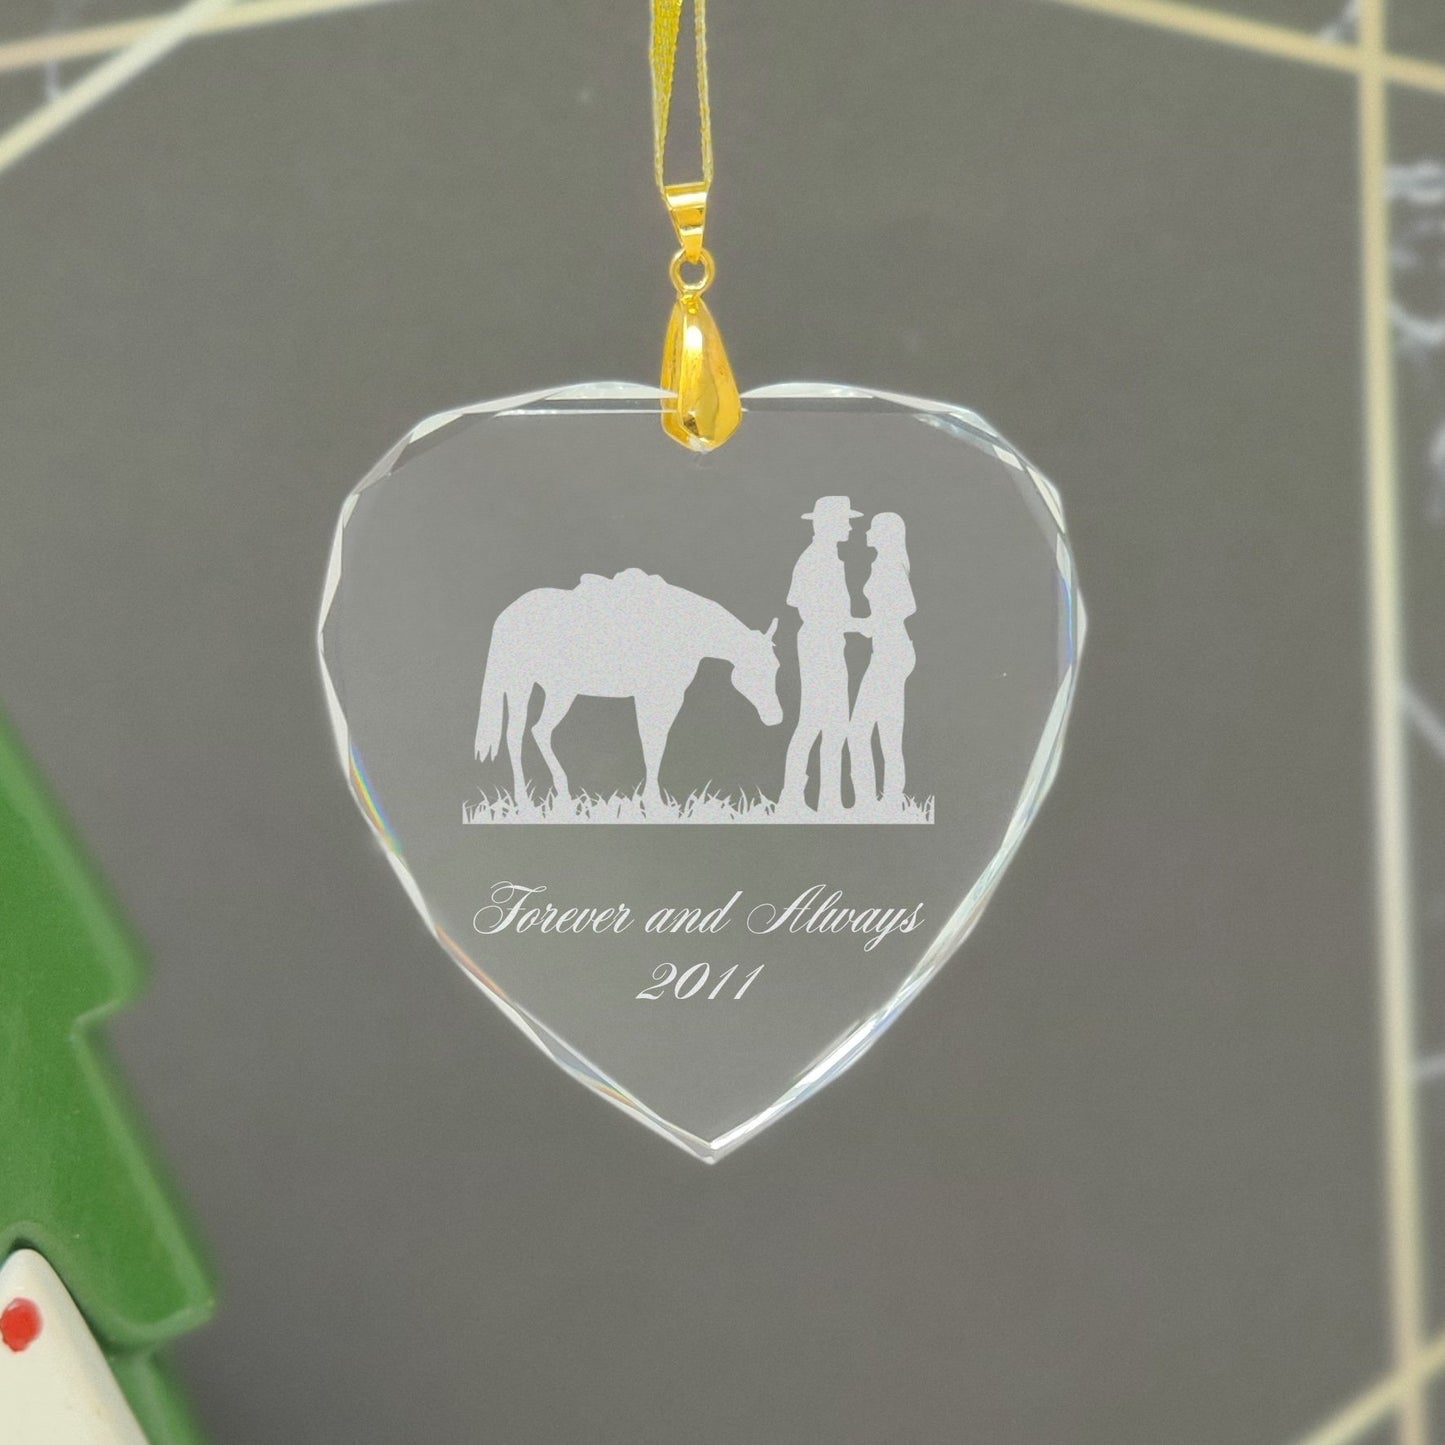 LaserGram Christmas Ornament, Curling Figure, Personalized Engraving Included (Heart Shape)